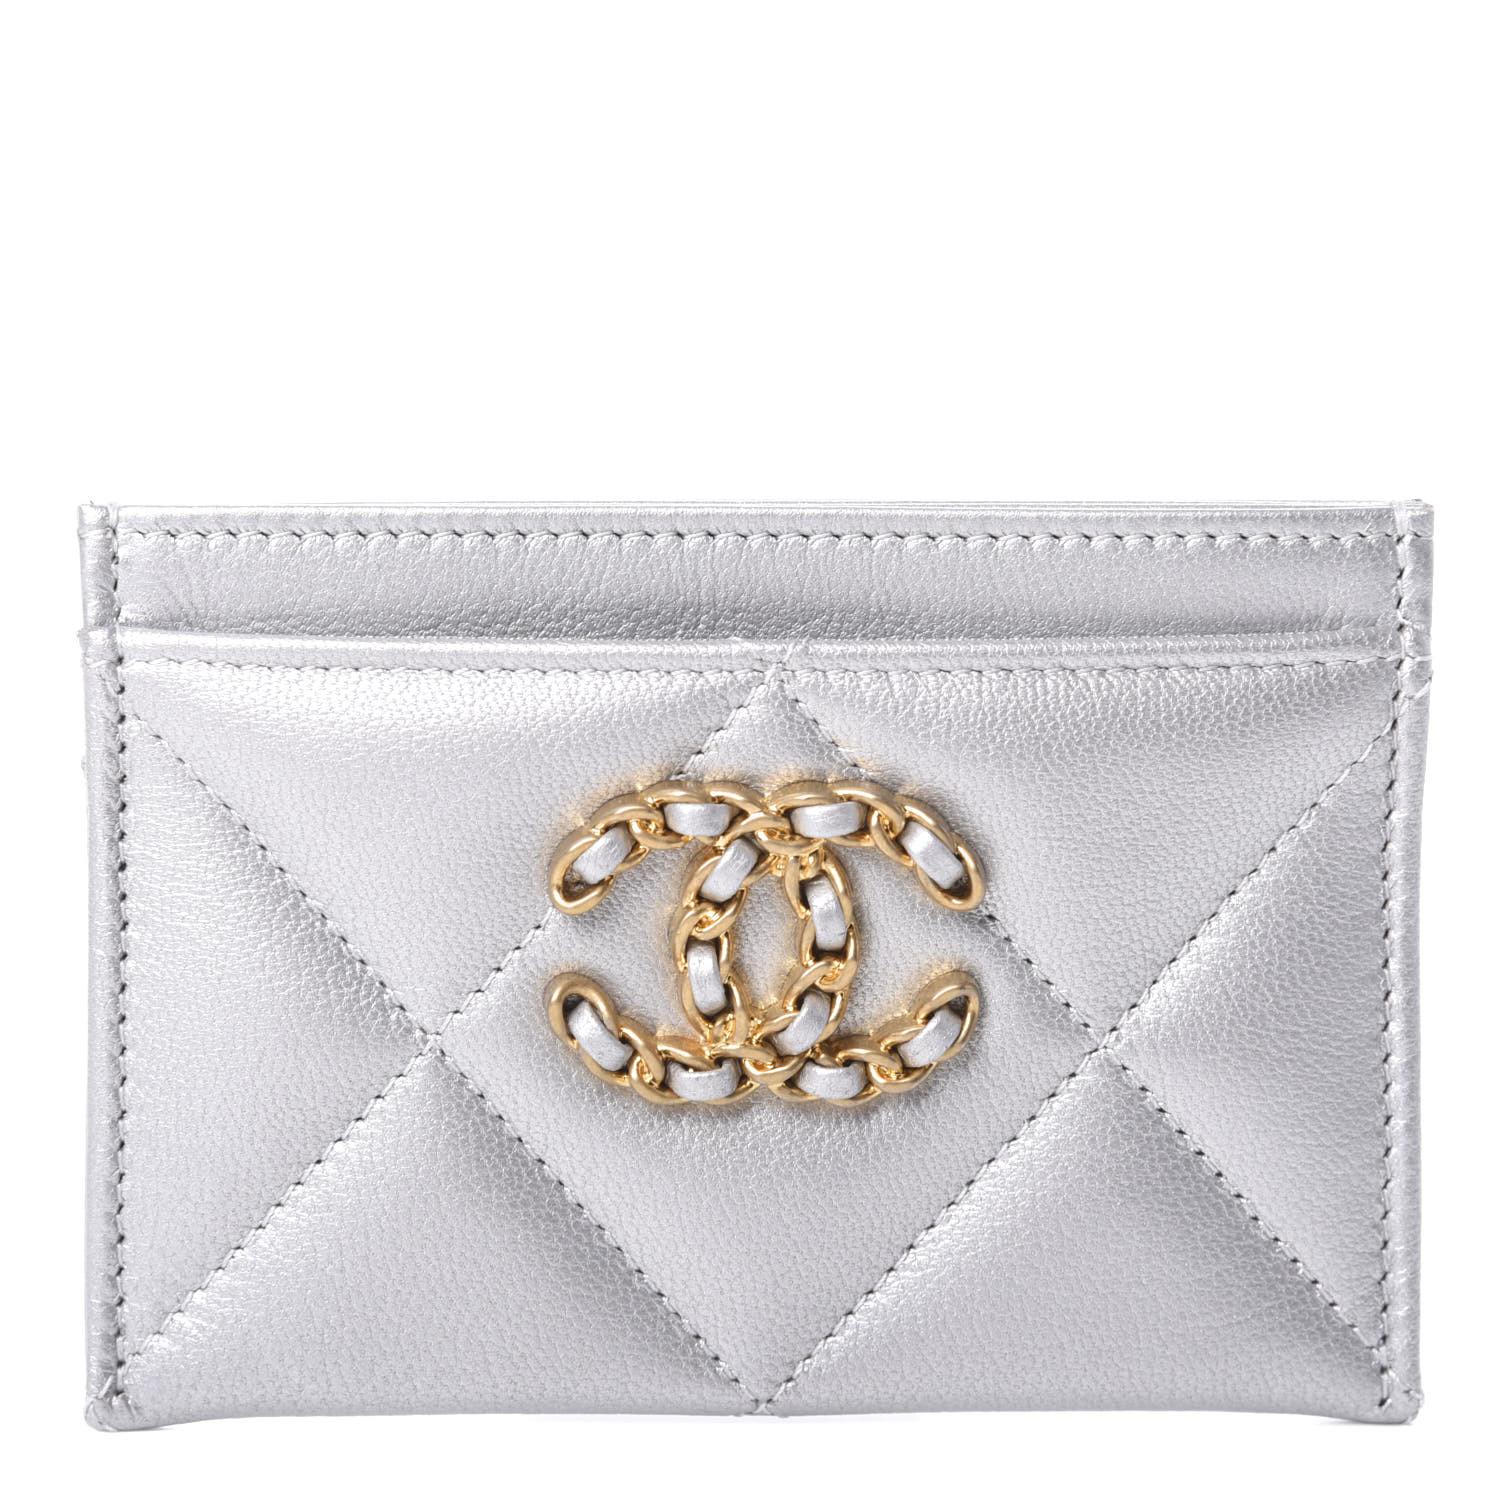 CHANEL Metallic Goatskin Quilted 19 Card Holder Silver 617622 